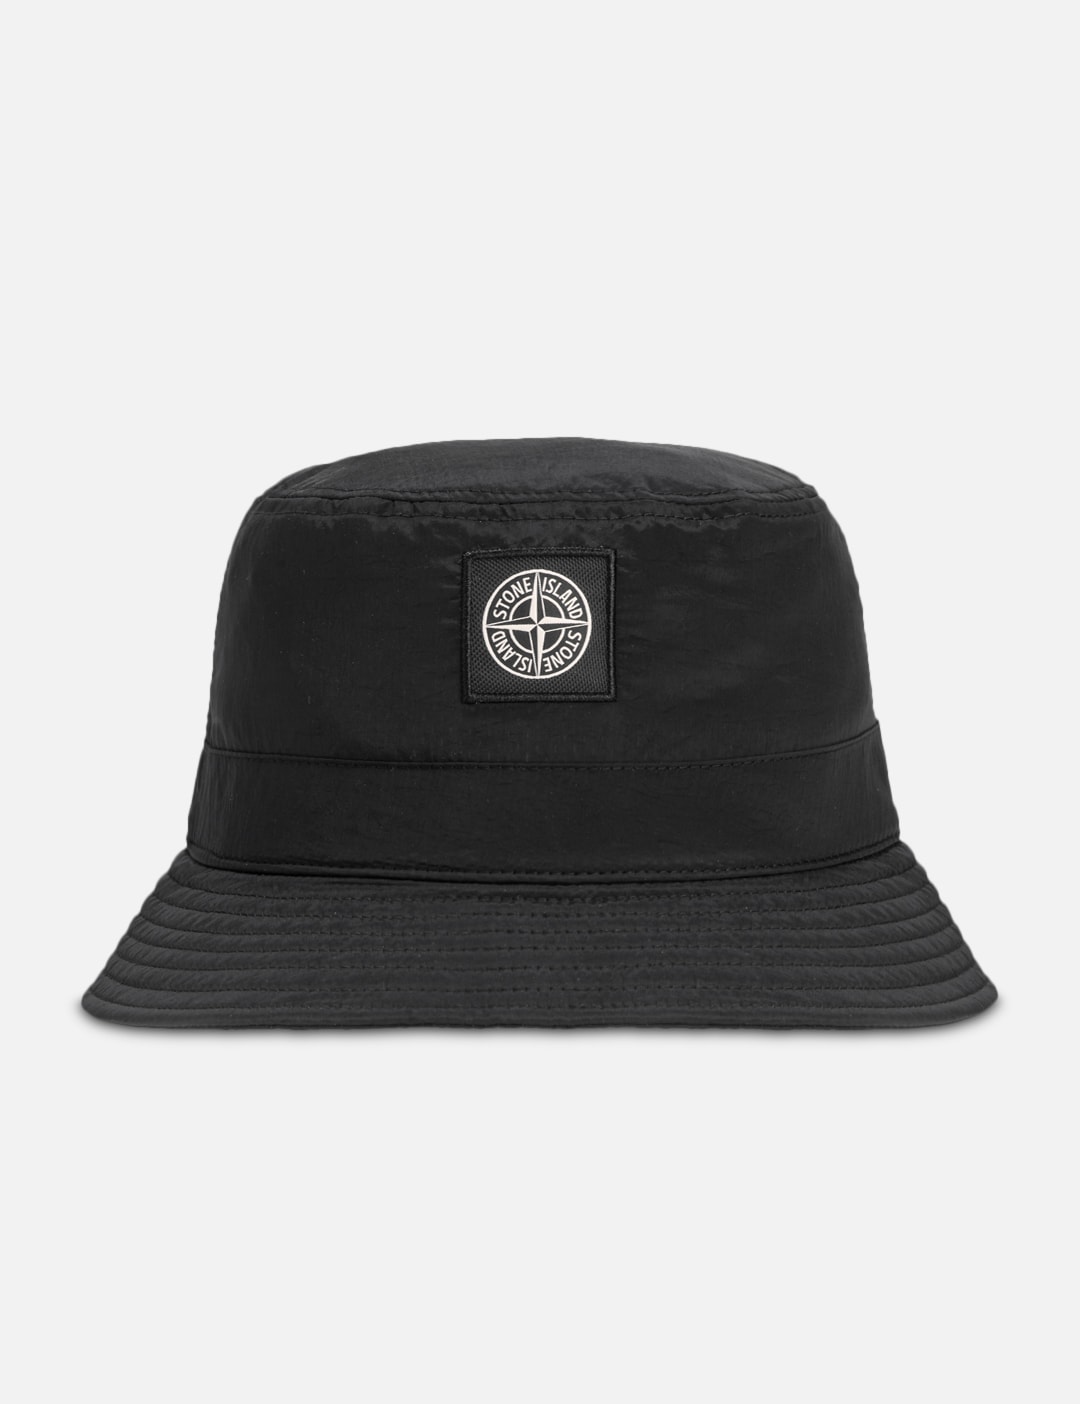 Stone Island - Nylon Bucket Hat | HBX - Globally Curated Fashion and ...